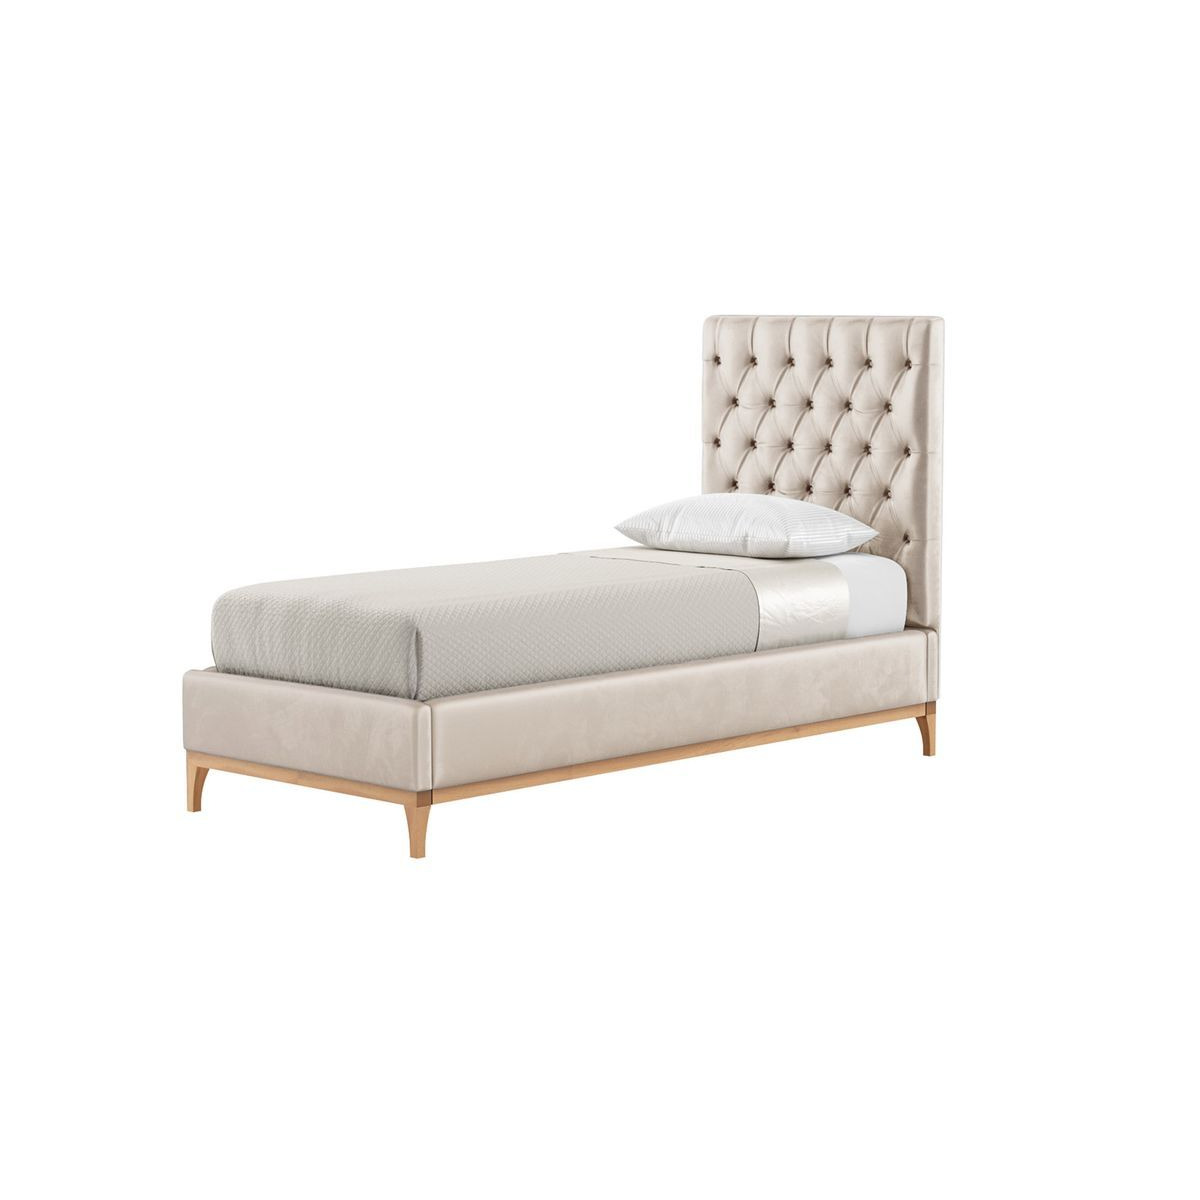 Marlon 3ft Single Bed Frame with luxury deep button quilted headboard, light beige, Leg colour: like oak - image 1